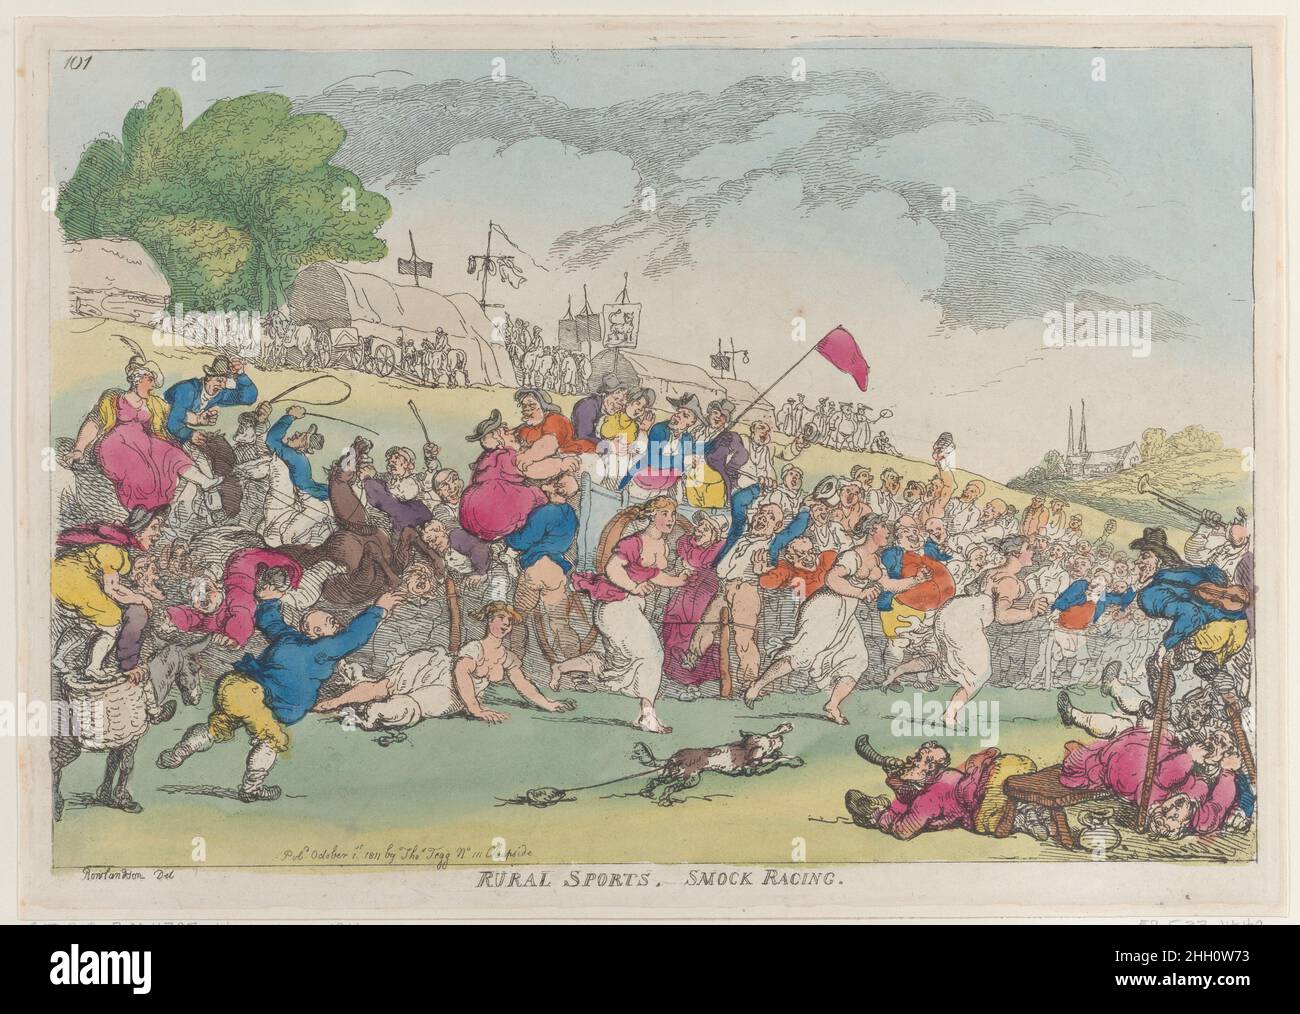 Rural Sports, Smock Racing [October 1, 1811], reprint Thomas Rowlandson A crowd watches three country girls who race barefoot and scantily clad. A fourth girl has been tripped by a dog at left.. Rural Sports, Smock Racing. Thomas Rowlandson (British, London 1757–1827 London). [October 1, 1811], reprint. Hand-colored etching. Thomas Tegg (British, 1776–1846). Prints Stock Photo